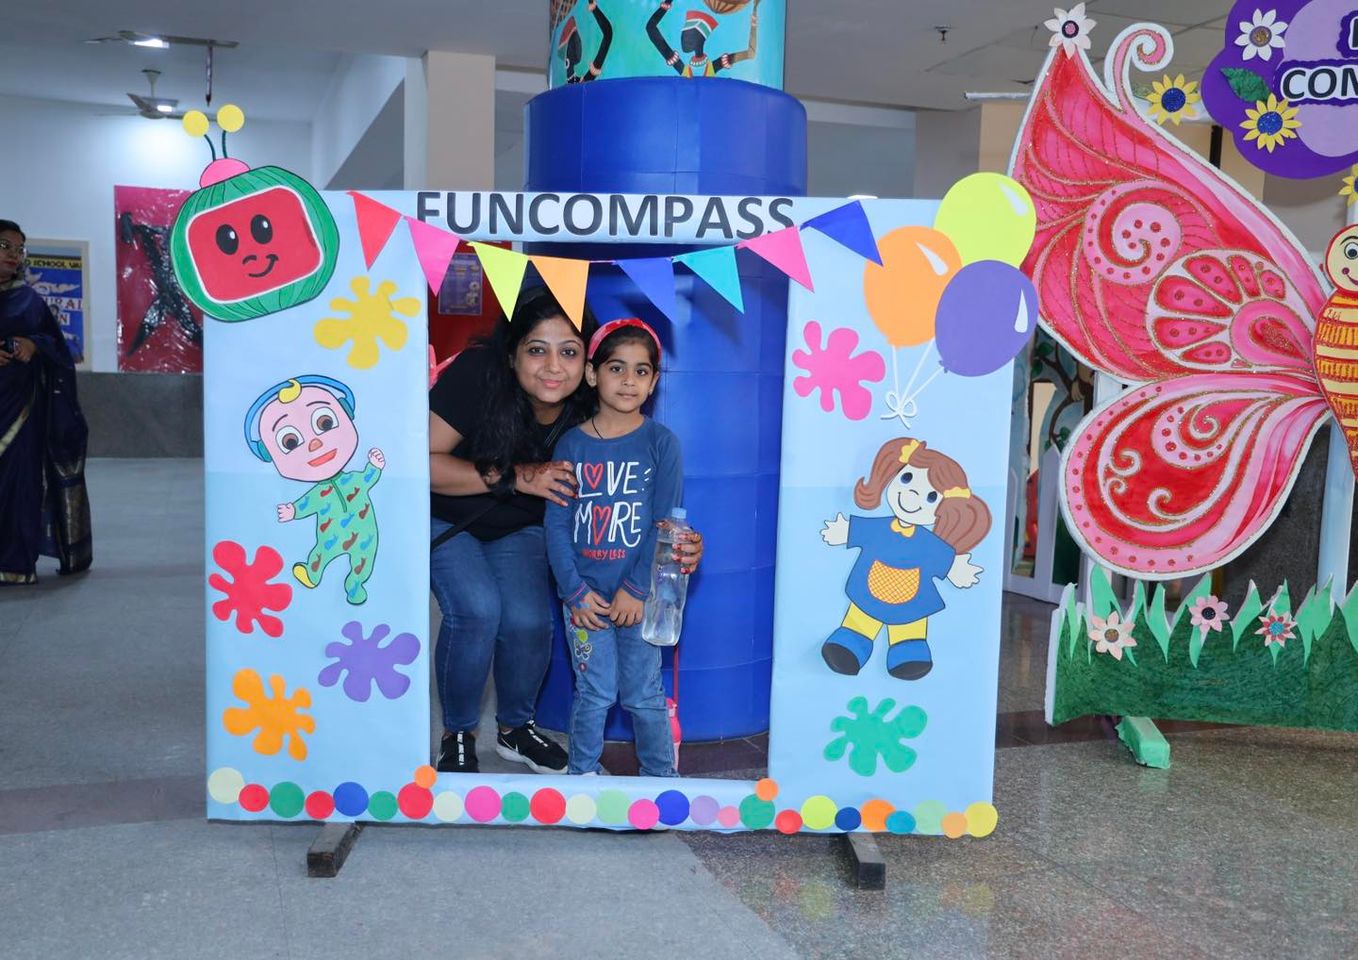 Fun Compass (Learning with joy) Event Glimpses